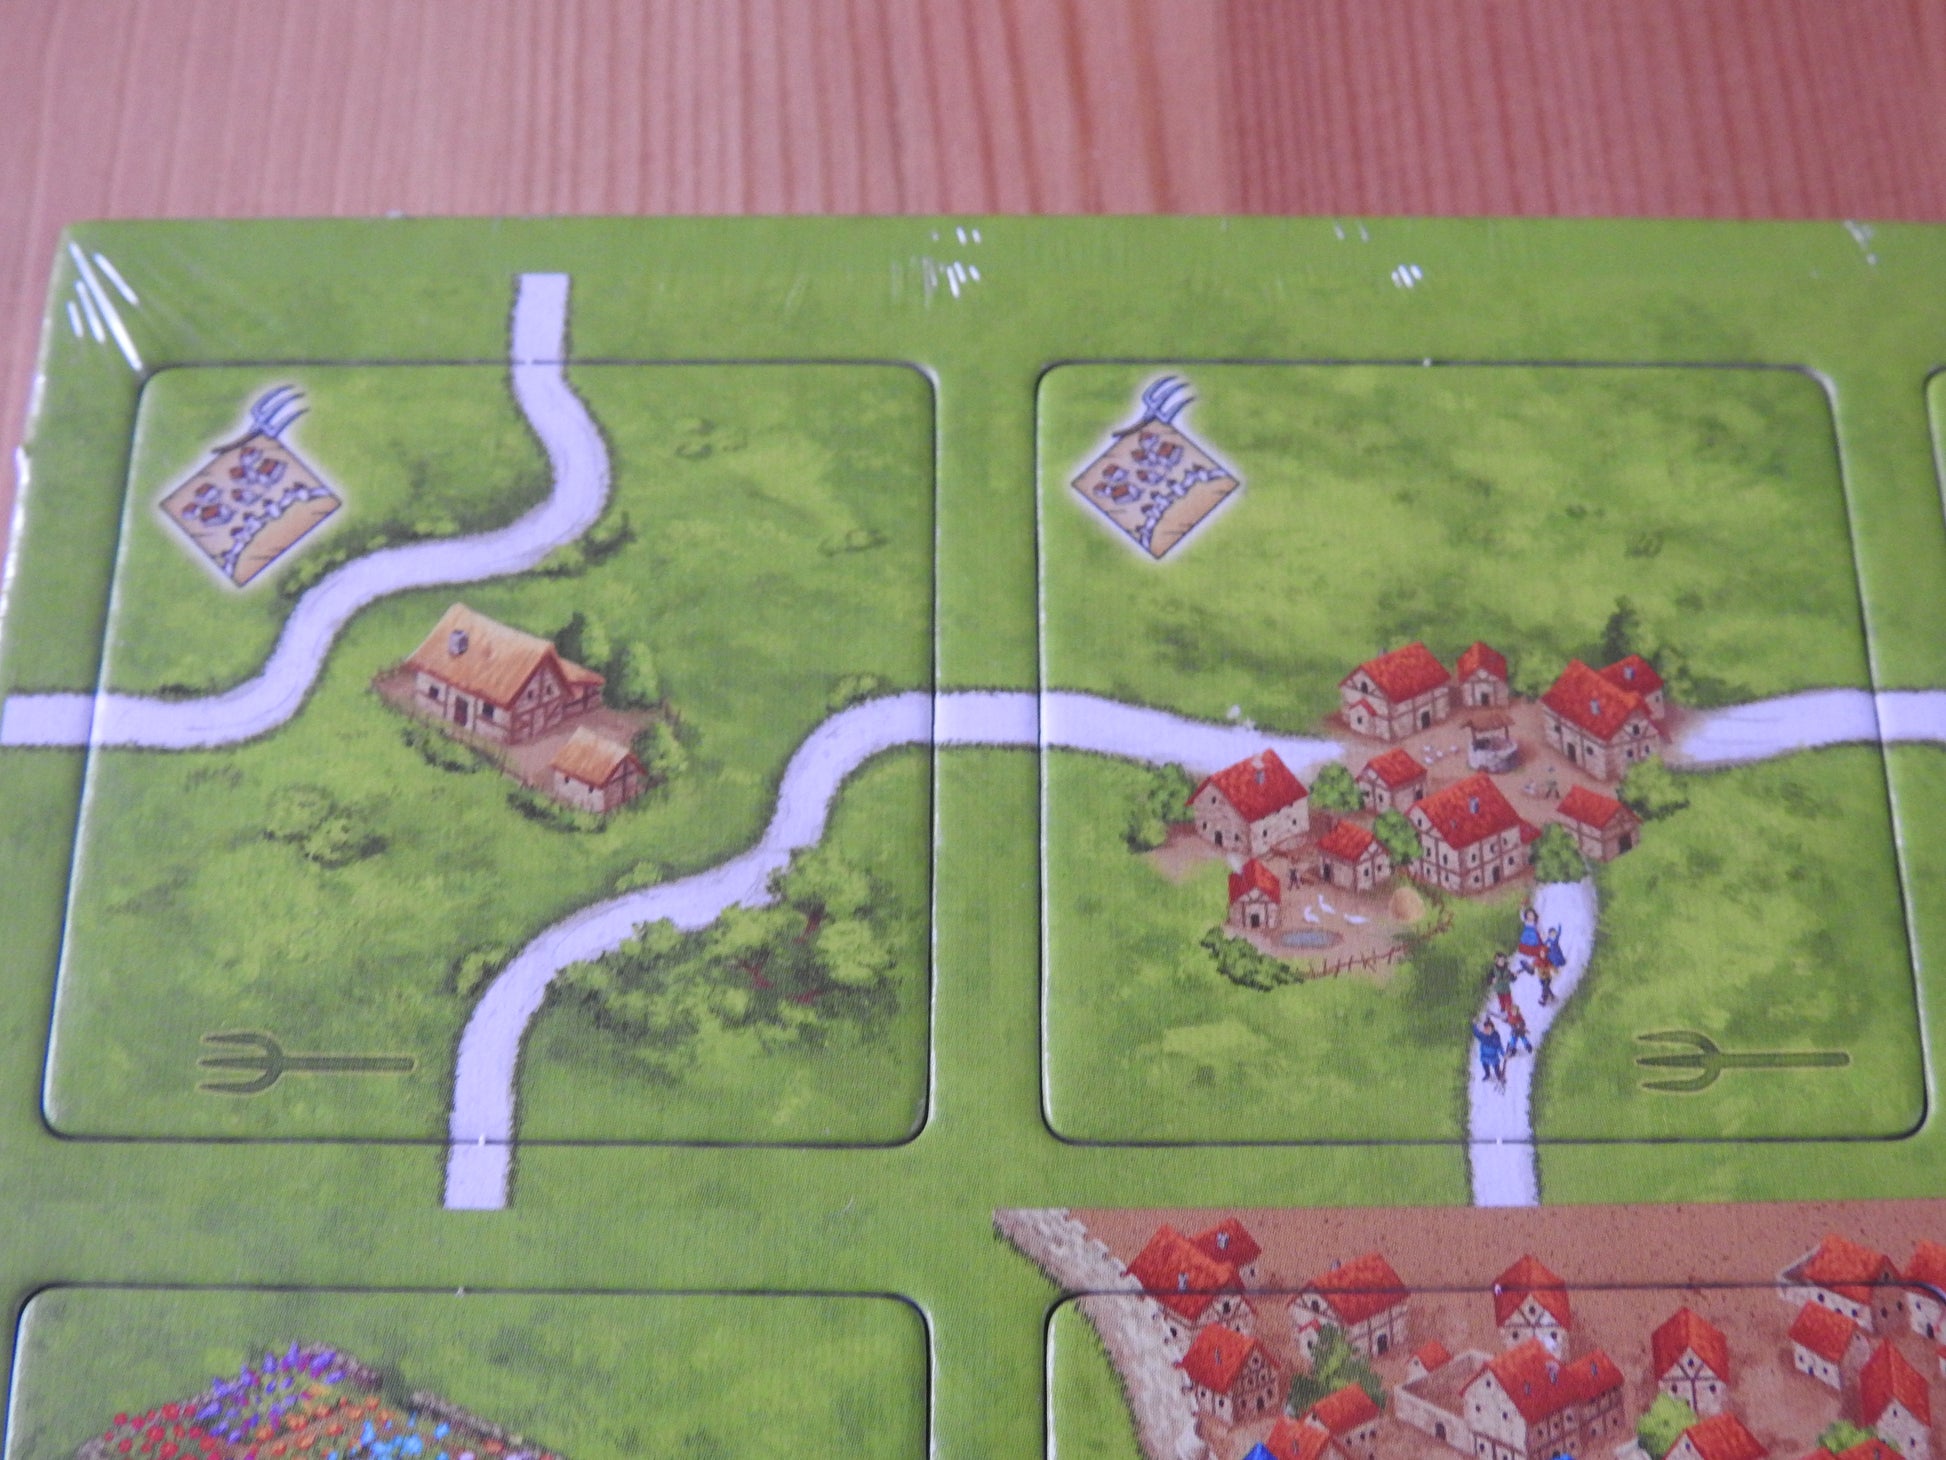 Close-up of 2 more tiles, showing roads, houses and an angry mob!